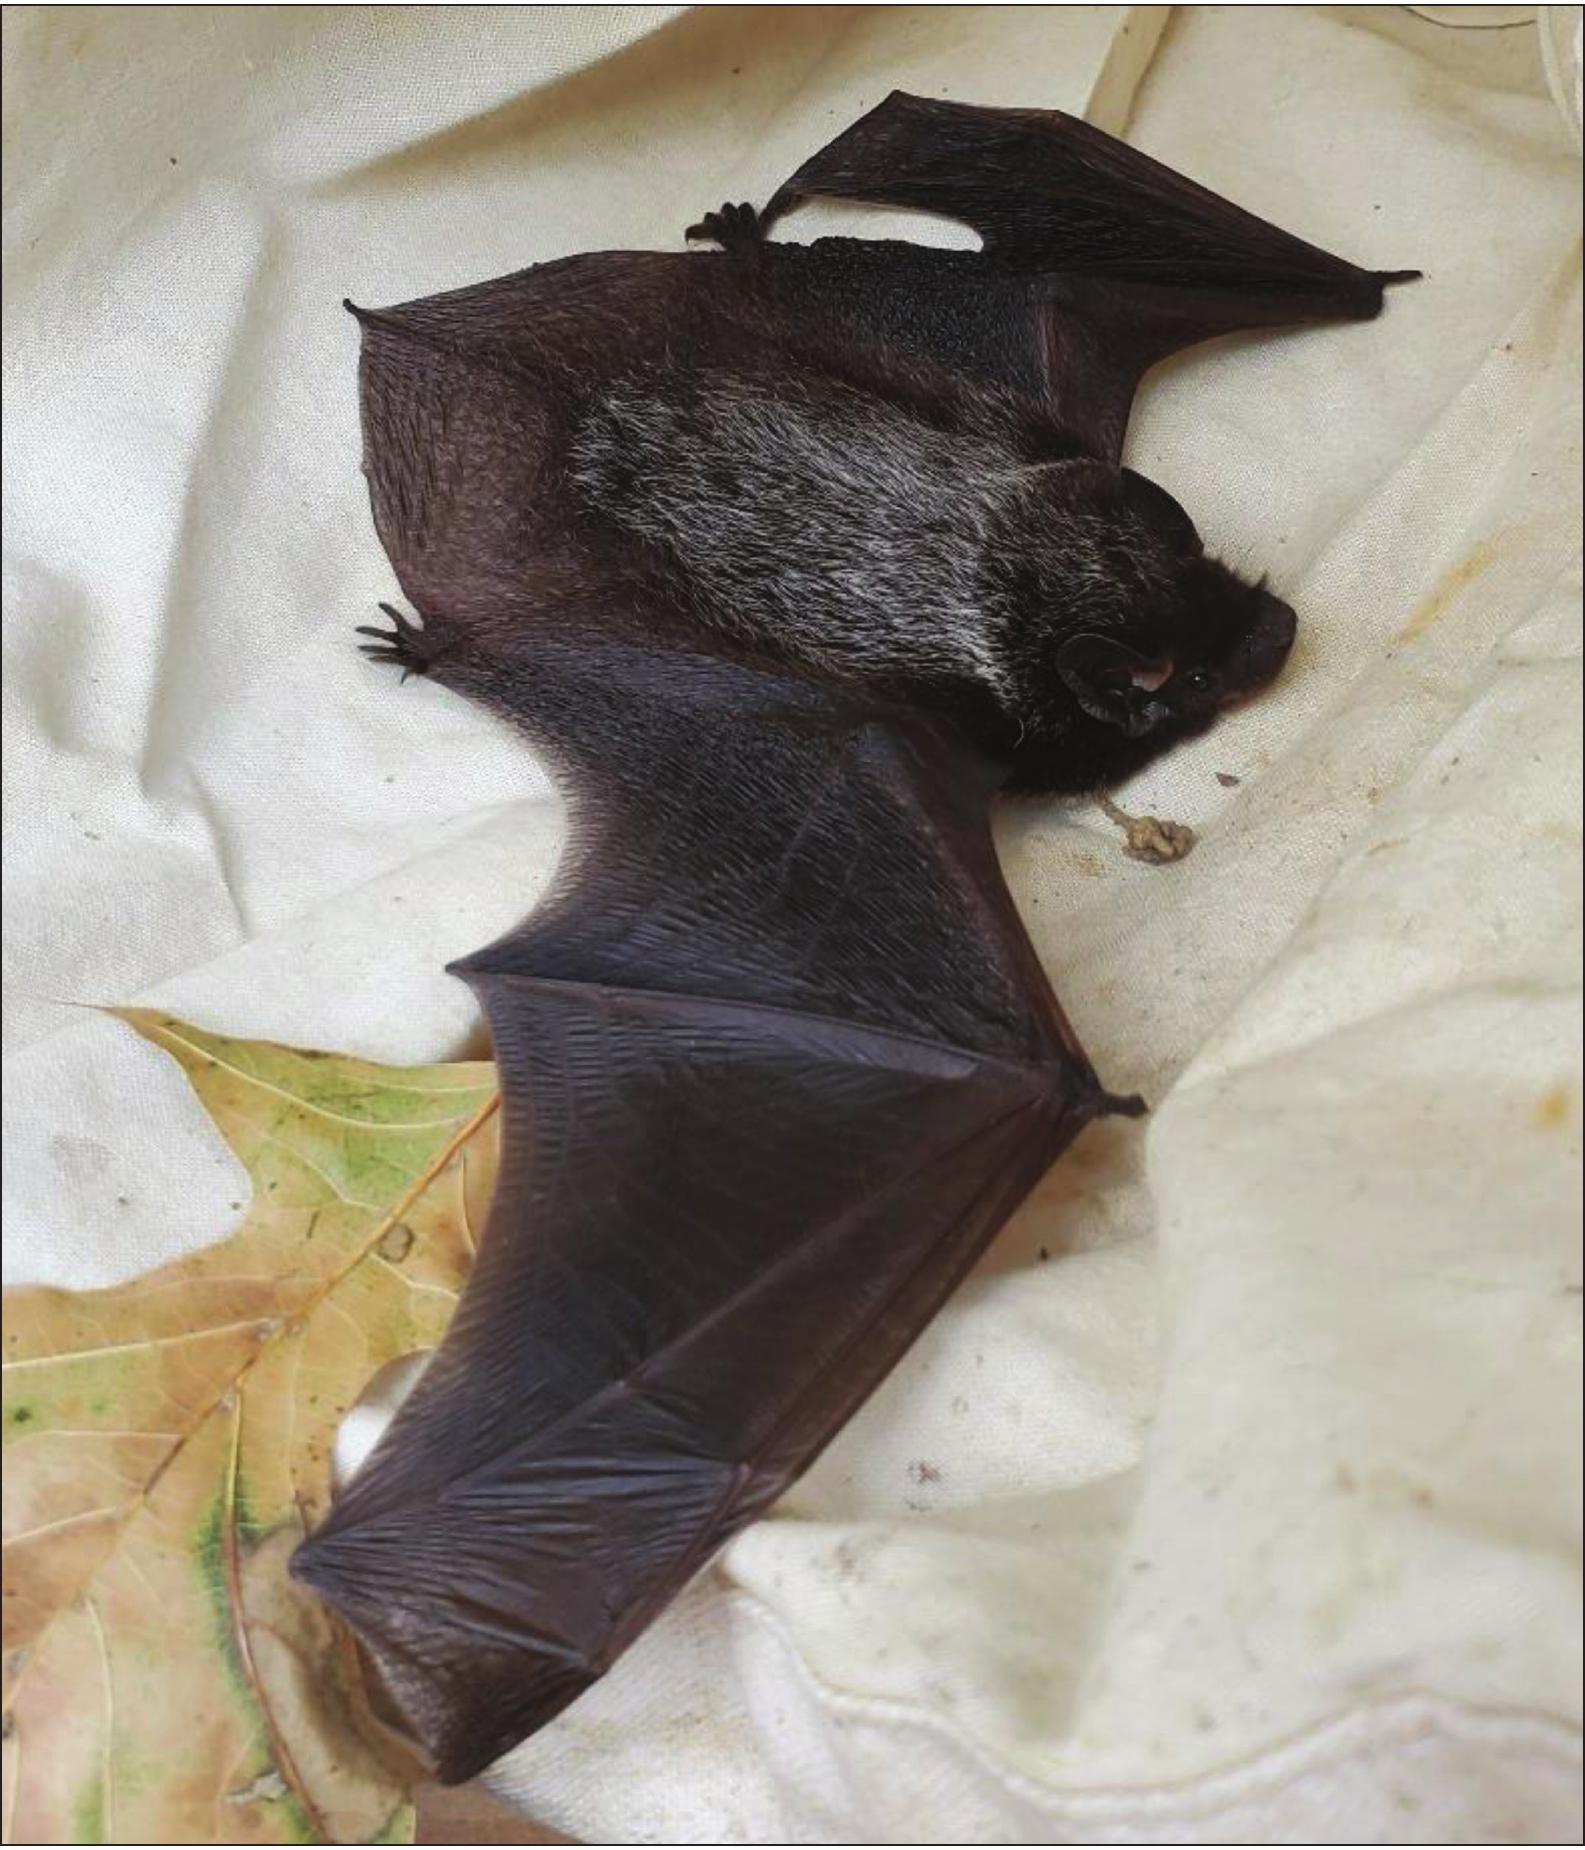 Migrating Silver-Haired Bat (Lasionycteris noctivagans) in Mississippi